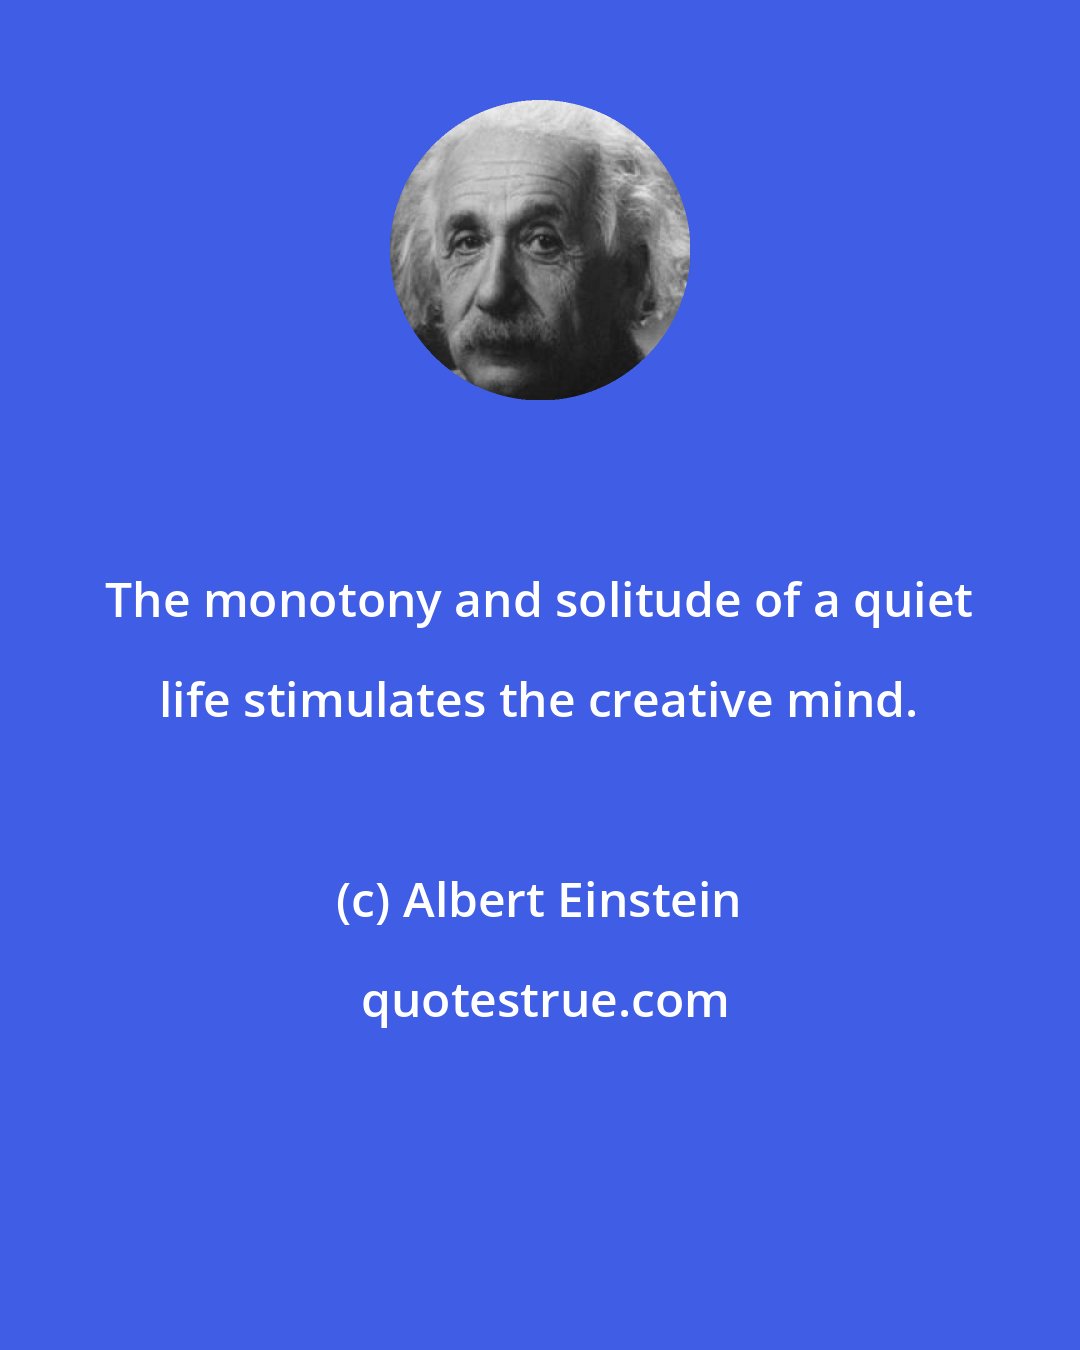 Albert Einstein: The monotony and solitude of a quiet life stimulates the creative mind.